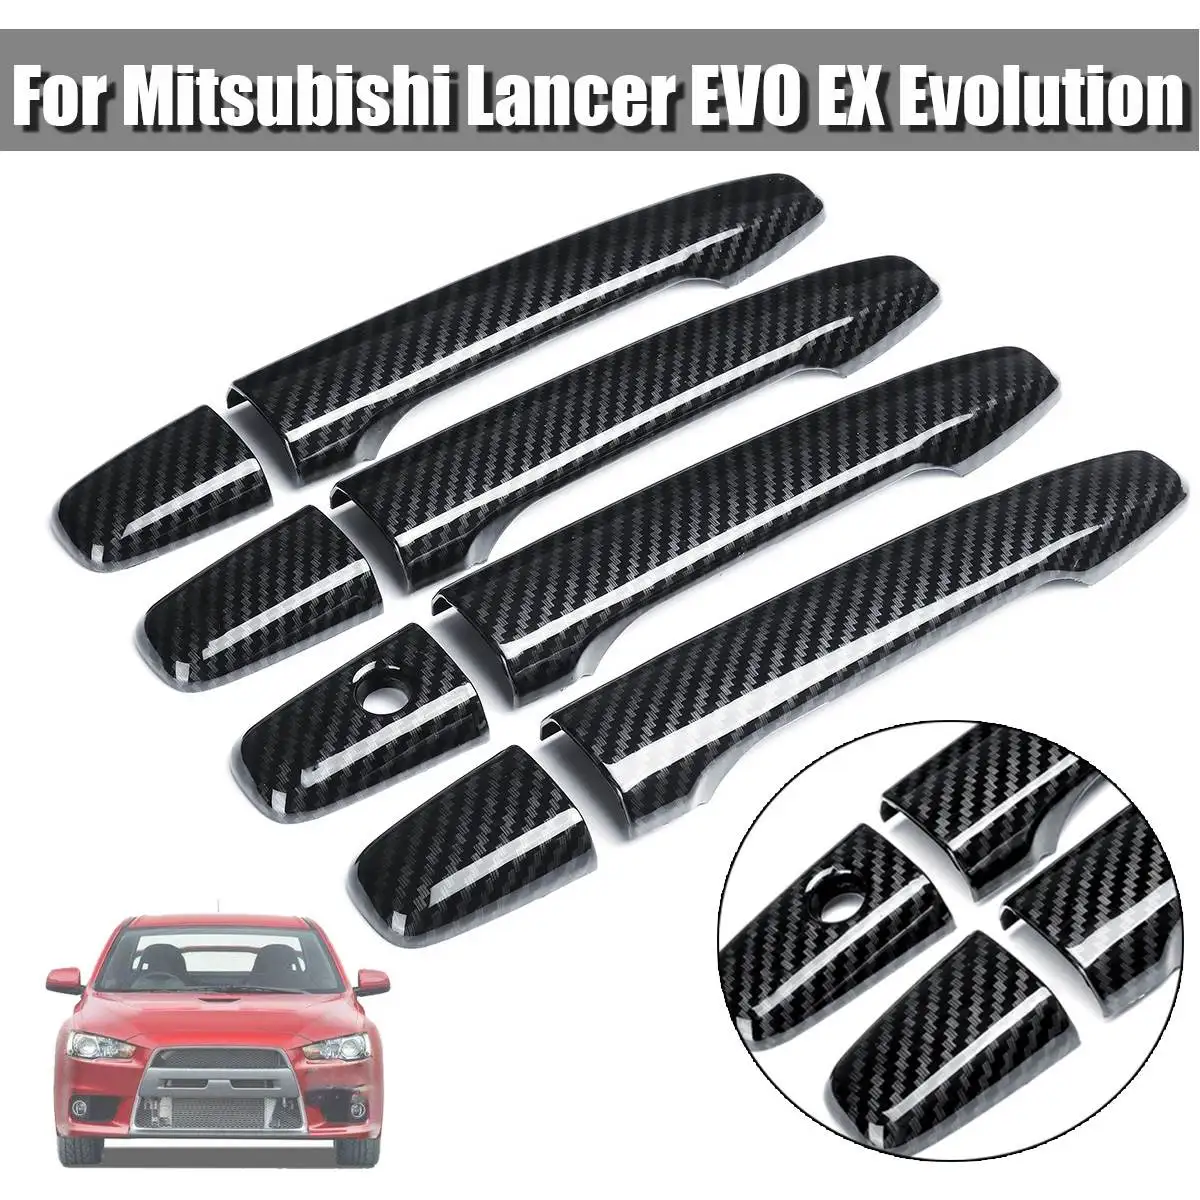 

8 Pieces ABS Carbon Fiber Style Door Handle Cover For Mitsubishi Lancer EVO EX Evolution Generation Car Styling